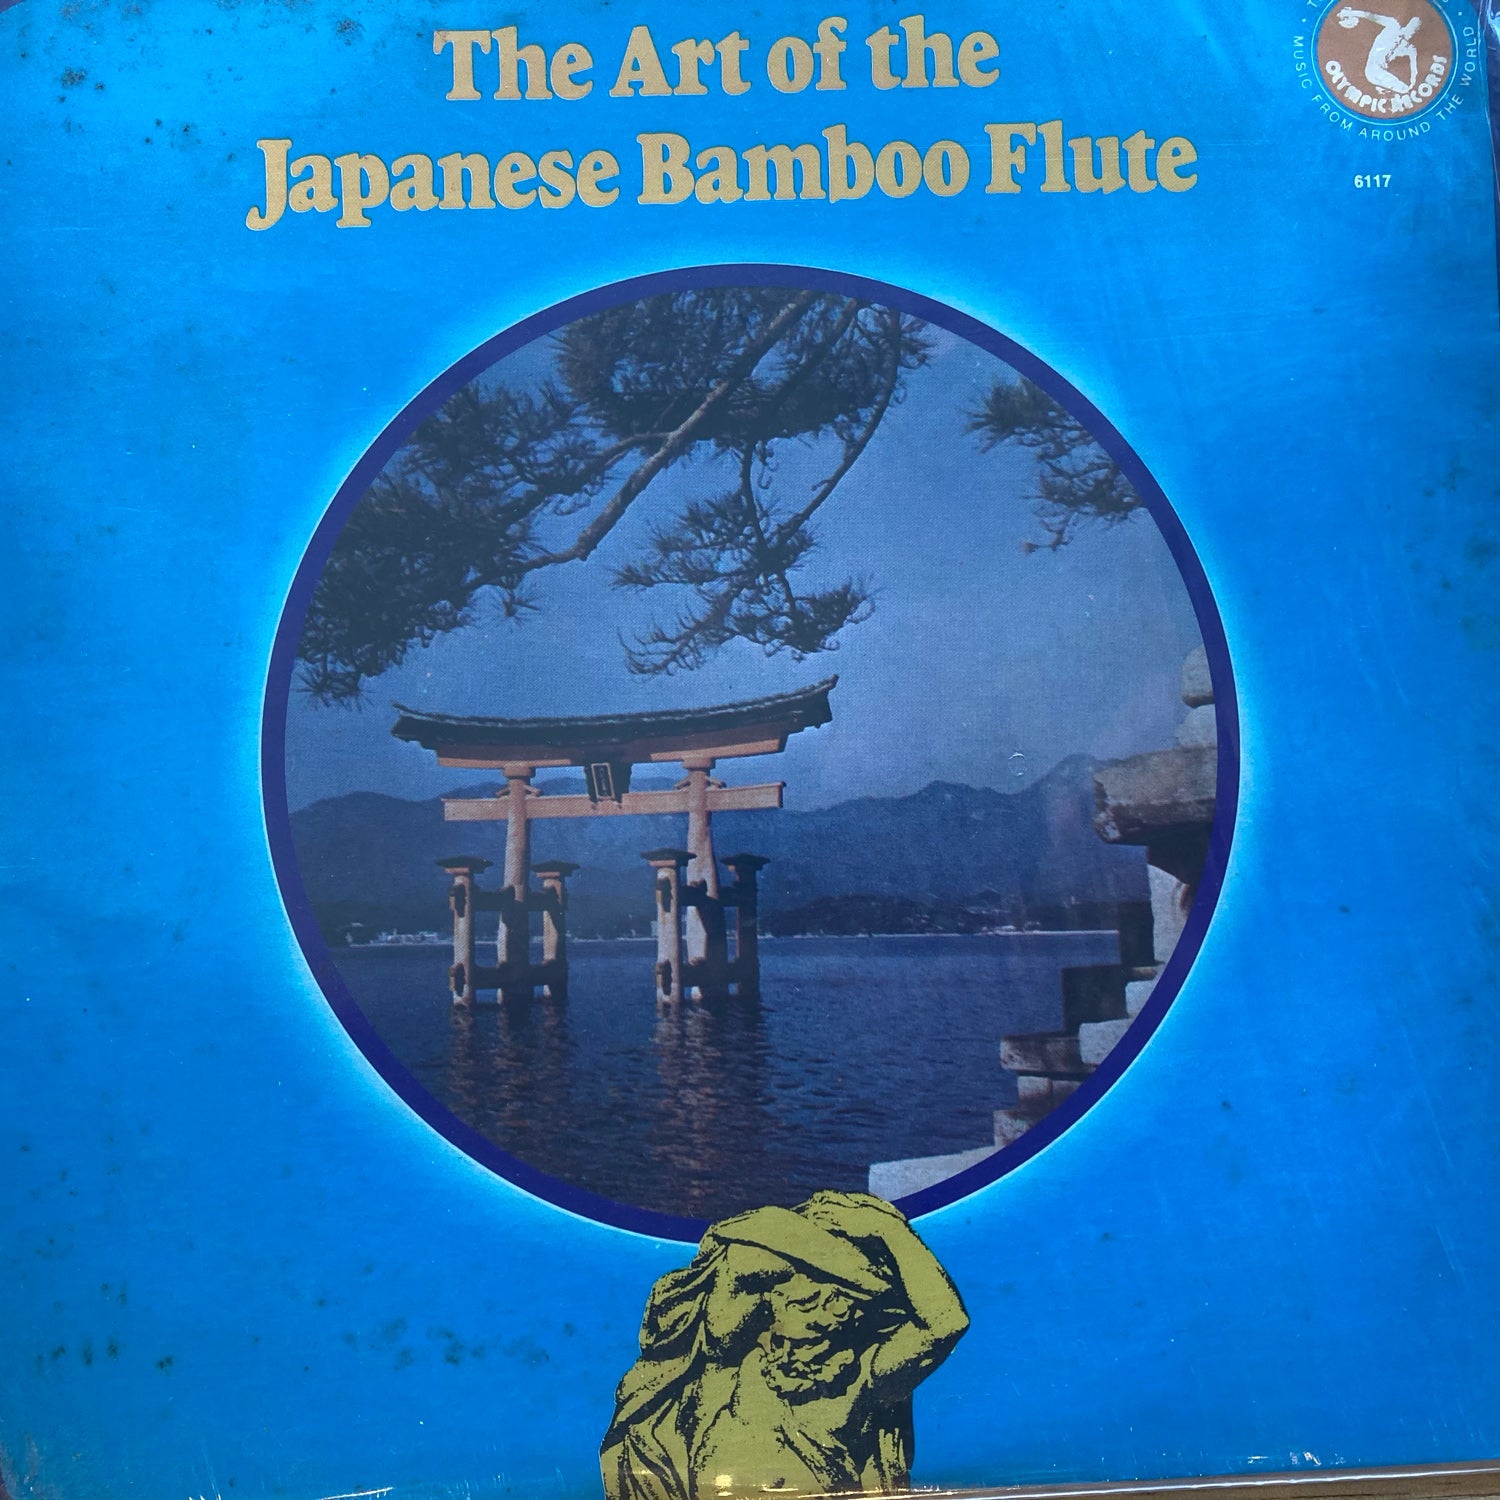 The Art of the Japanese Bamboo Flute